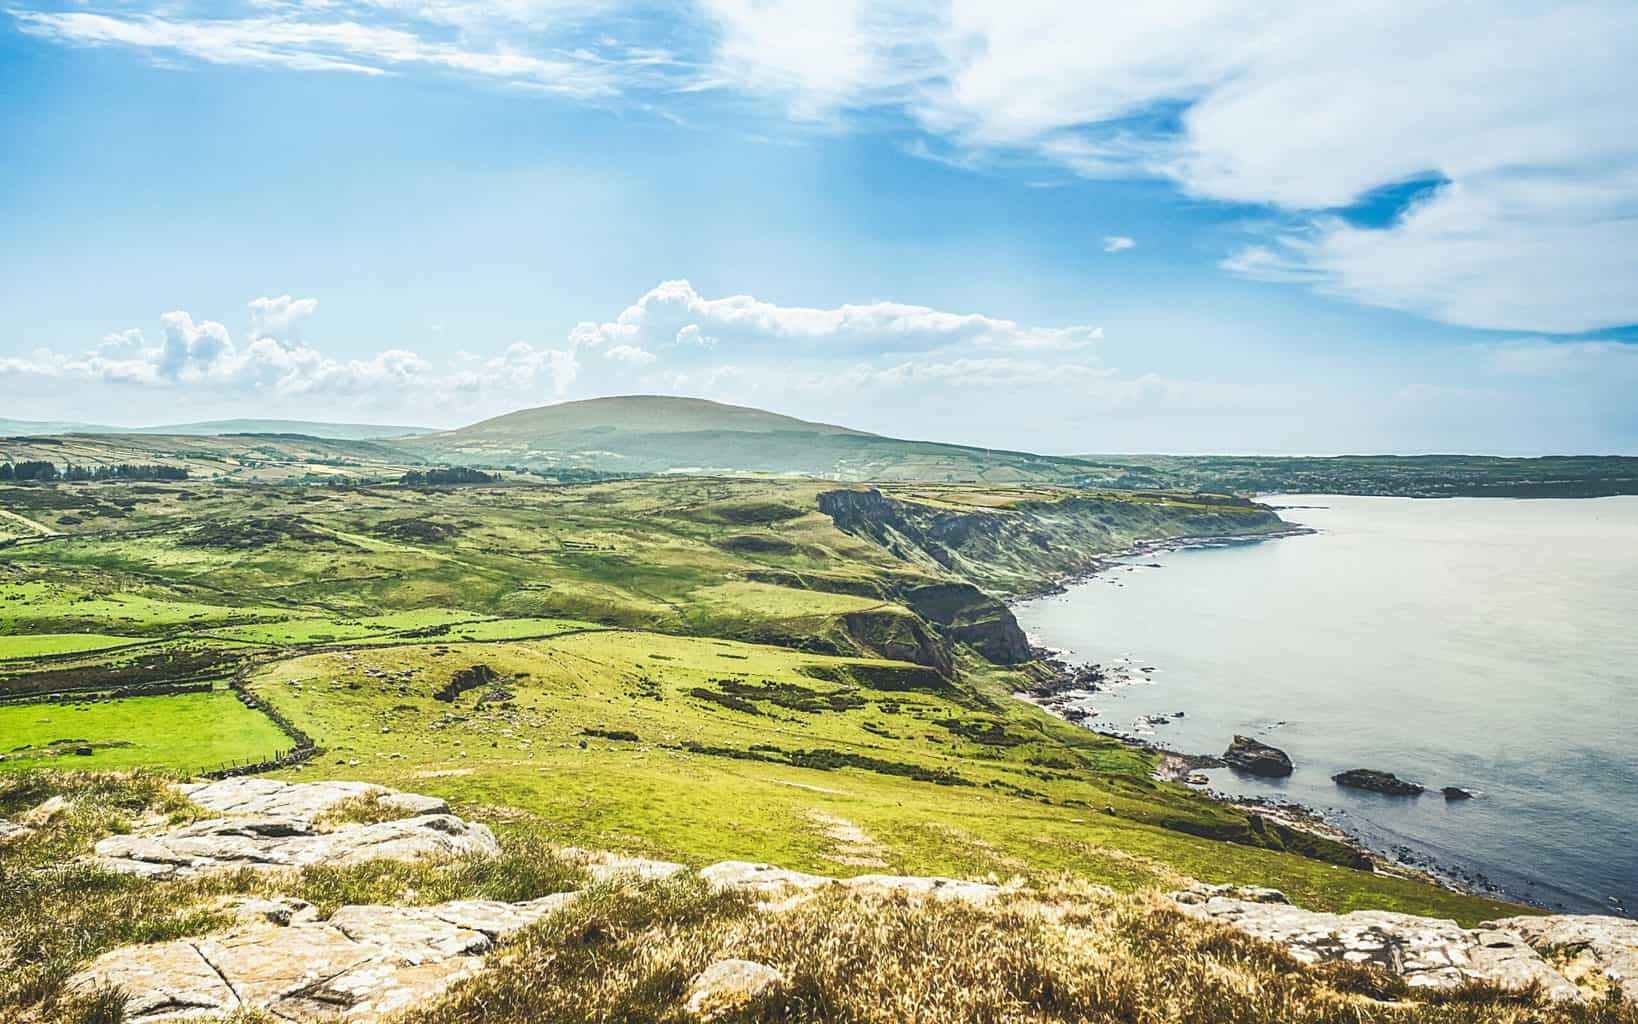 Looking out over The North Coast and the Glens of Antrim toward Ballycastle from Fair Head (Jun., 2020).